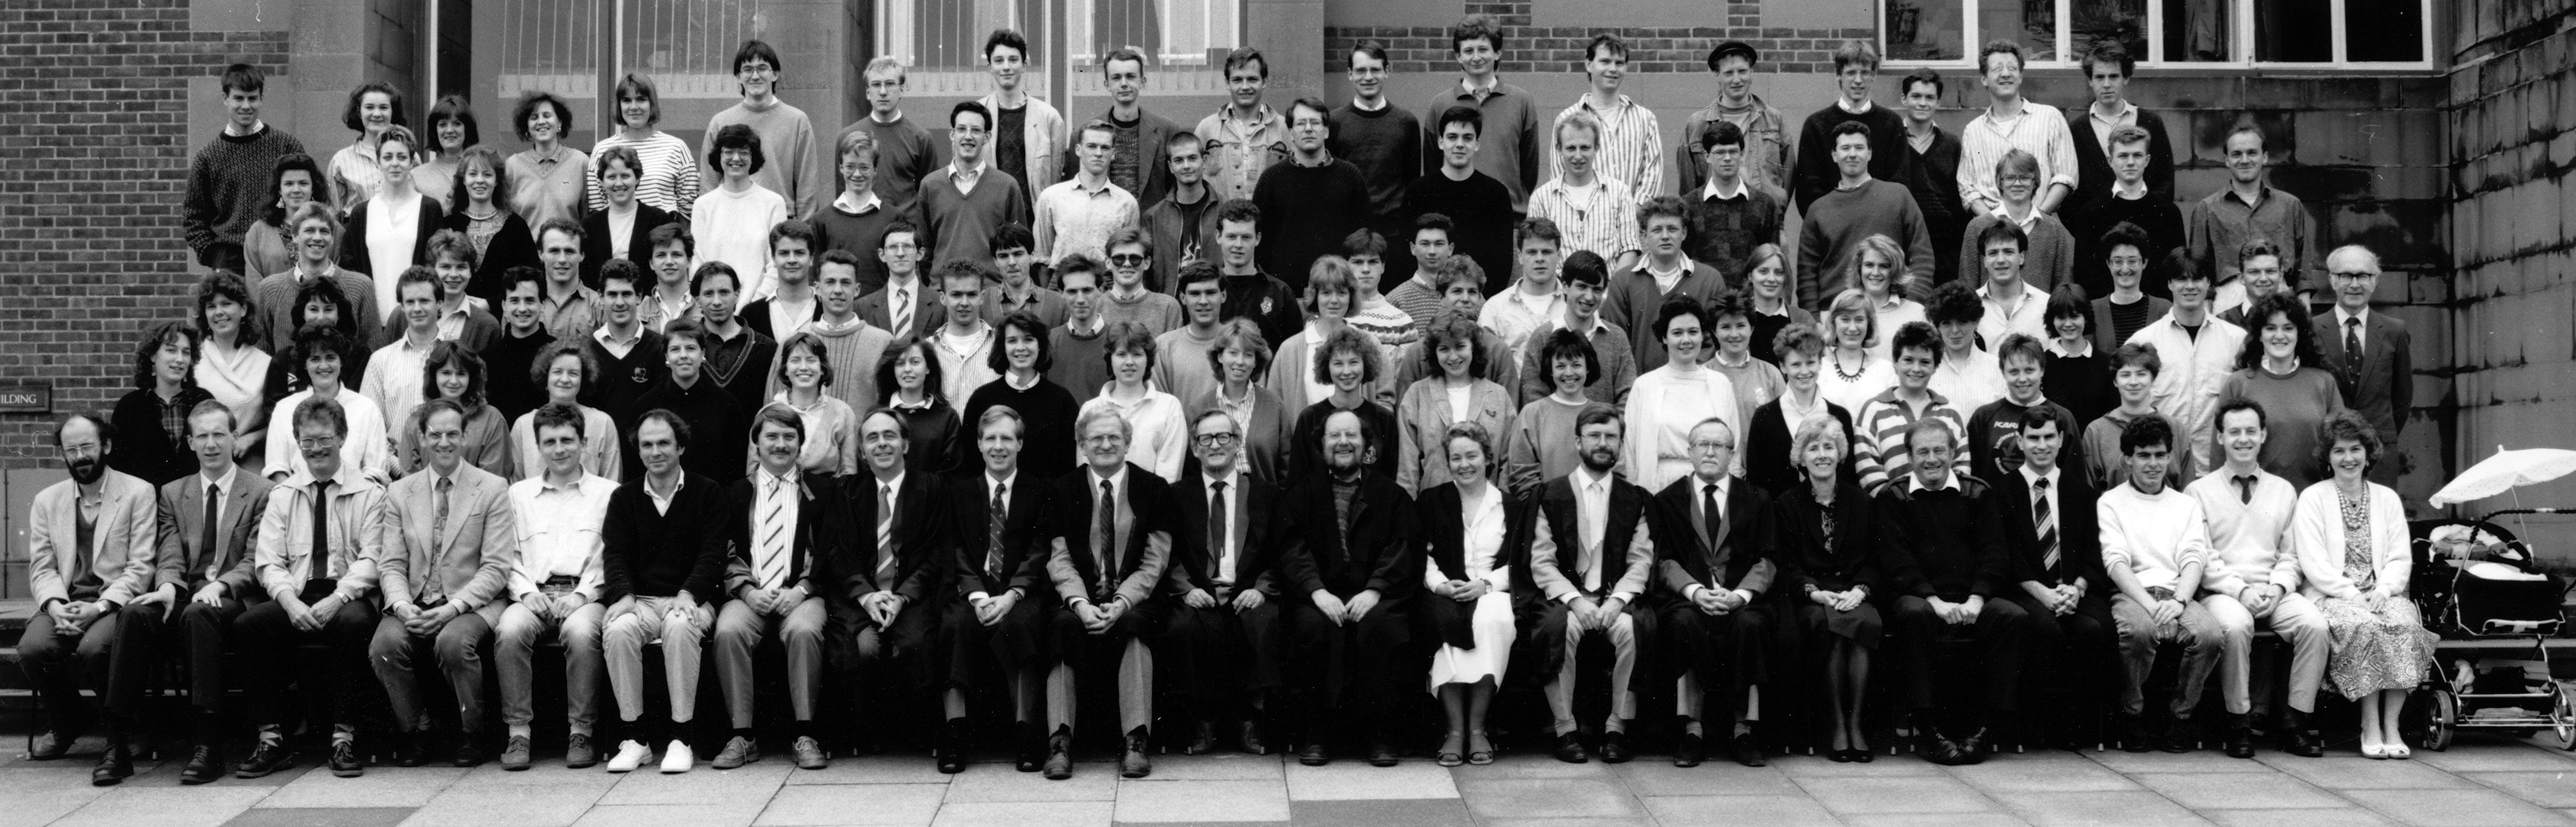 Geography Department Undergraduate Group photo from 1988